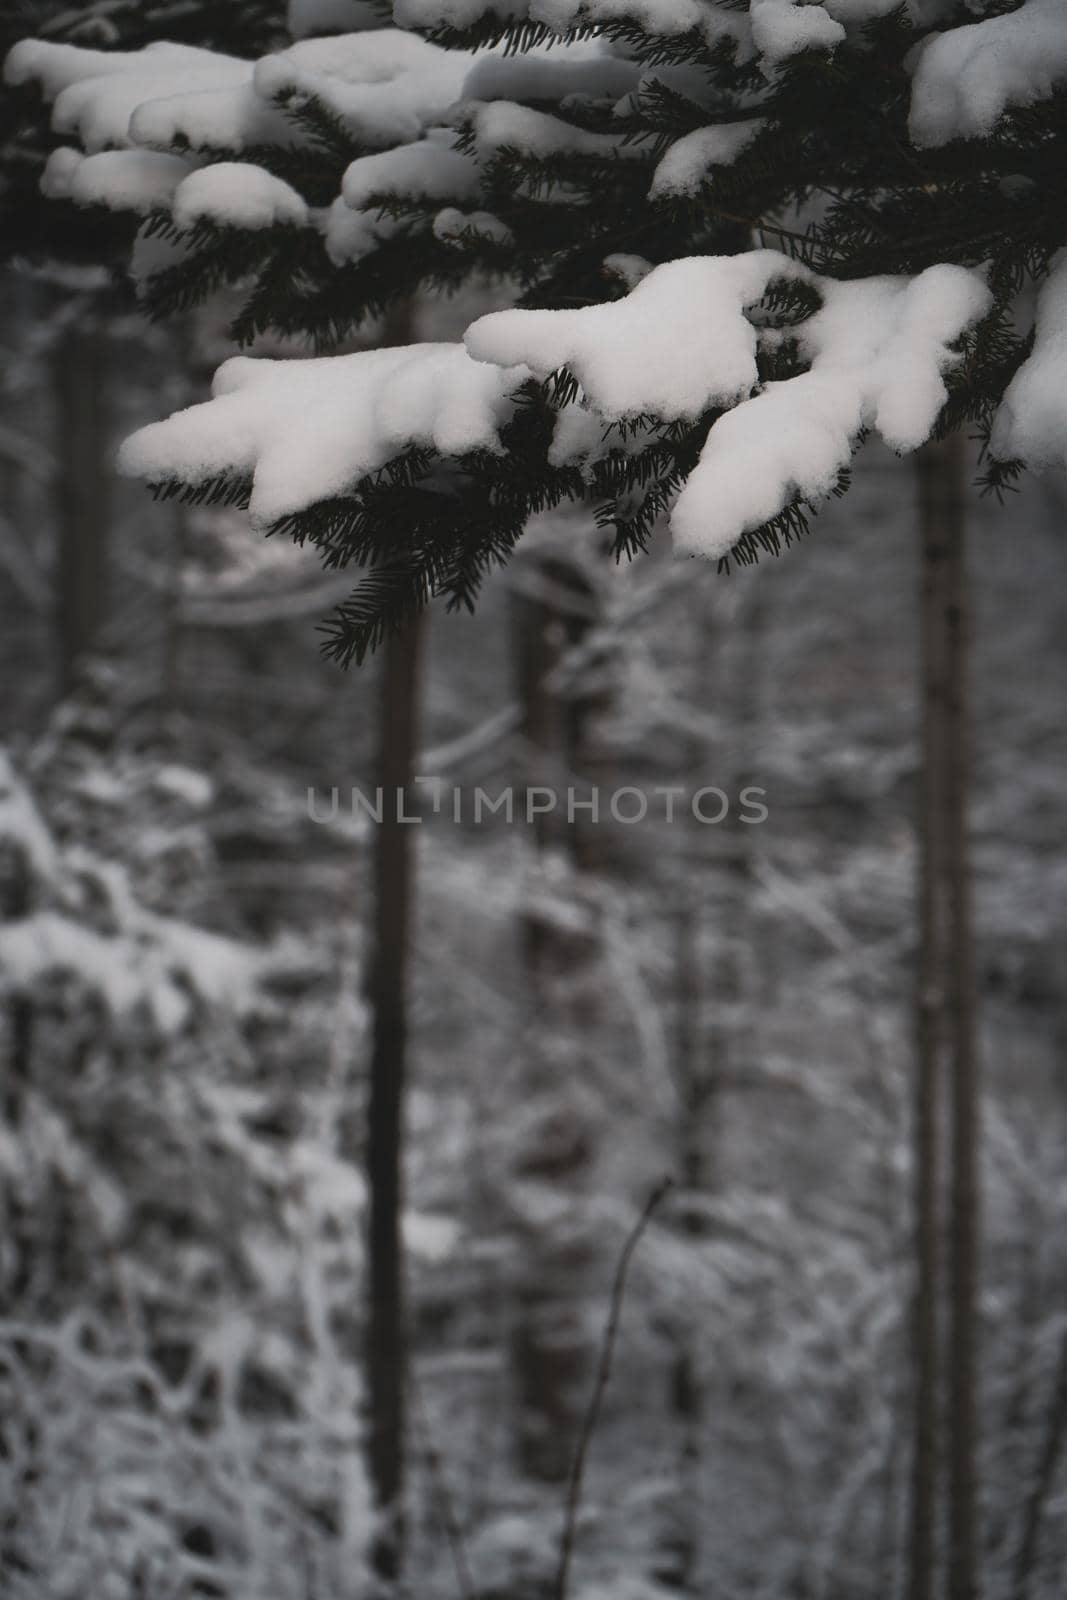 Winter forest with snow on trees by Skrobanek